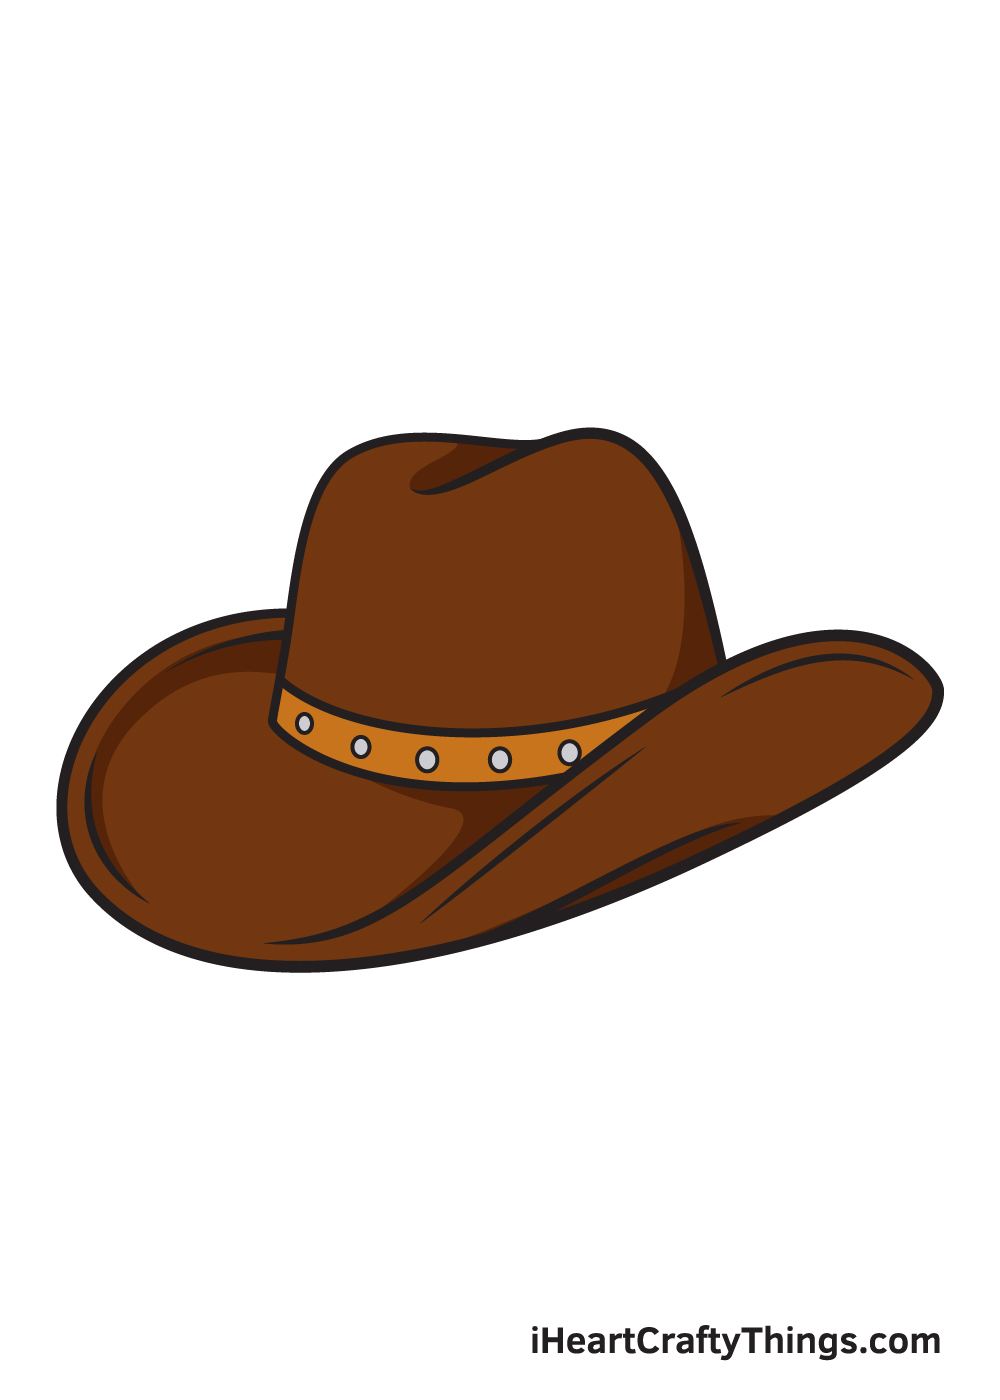 Cowboy Hat Drawing — How To Draw A Cowboy Hat Step By Step